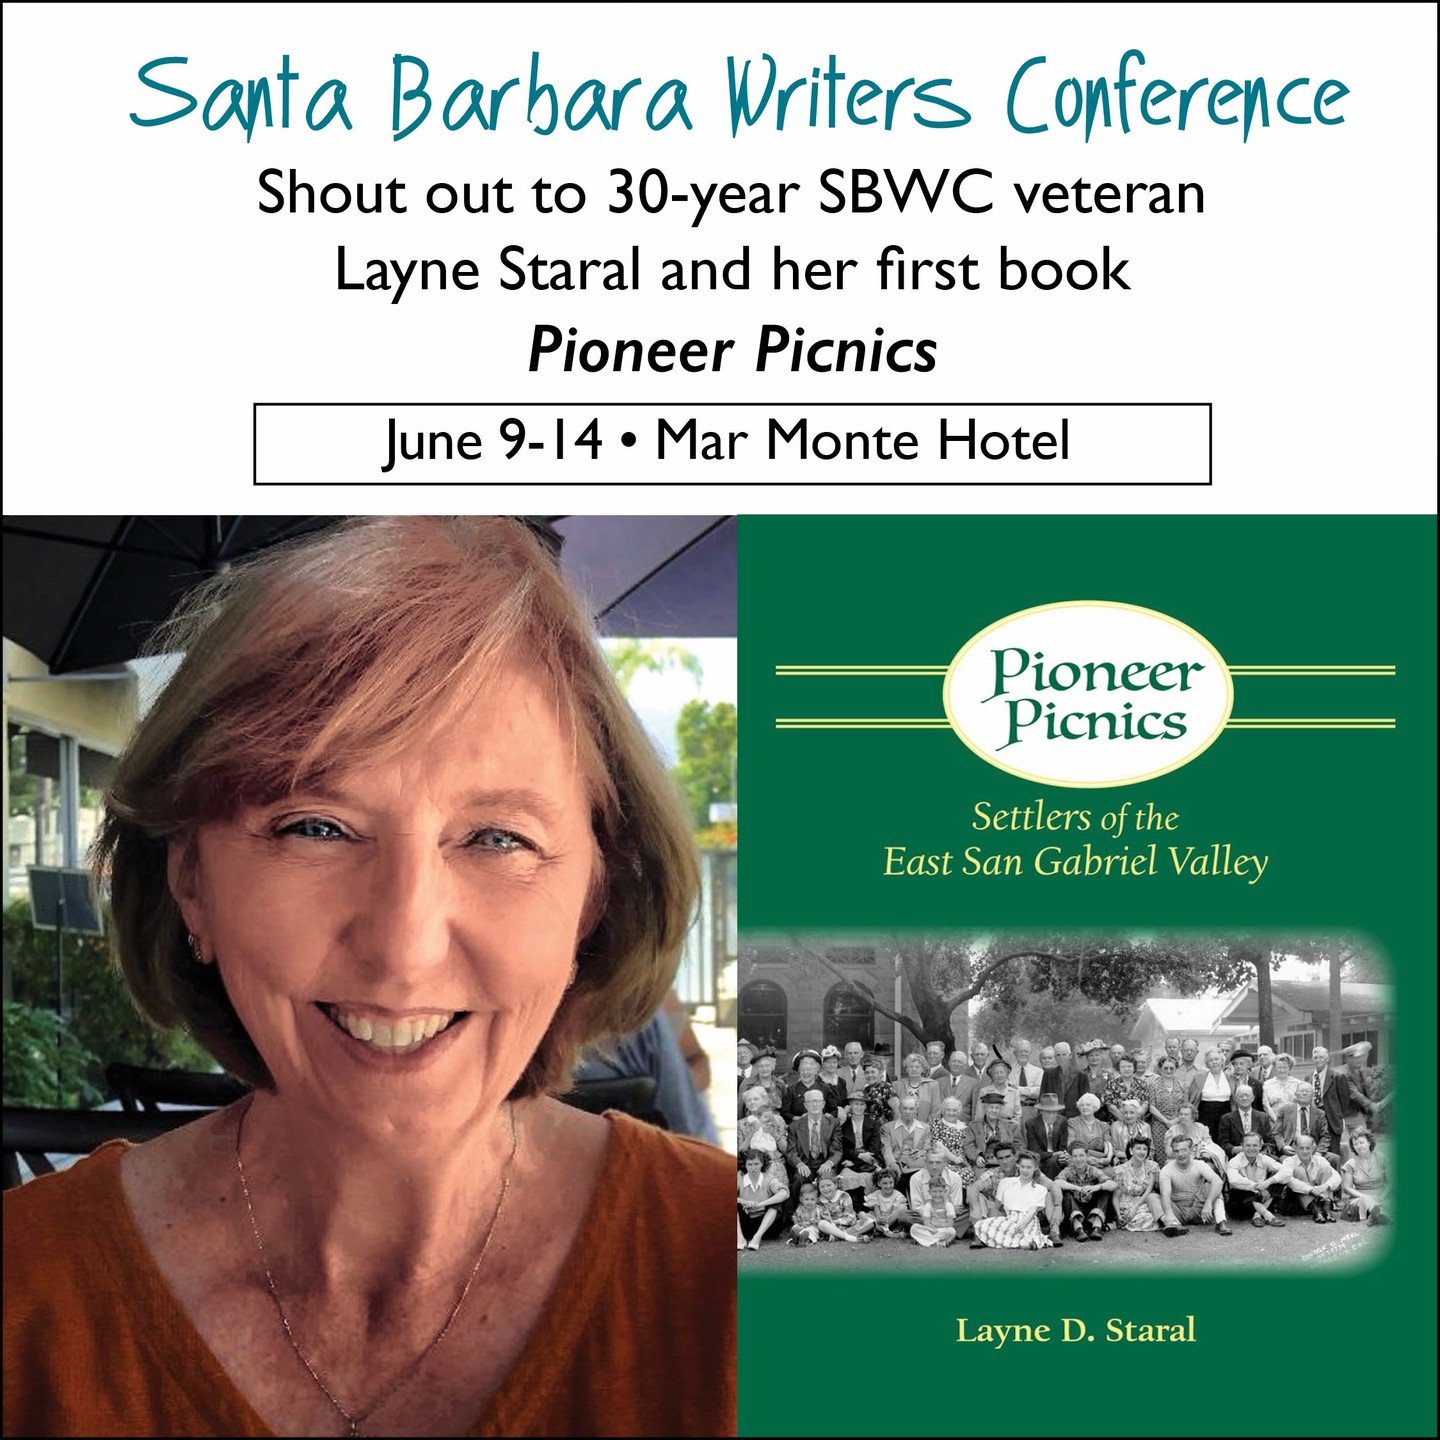 Go, Layne Staral!
What began as a series of articles on Layne D. Staral's family history became the larger story of the settling of Henry Dalton's Ranchos Azusa and San Jos&eacute;. Thousands of books have been published by attendees of SBWC over the